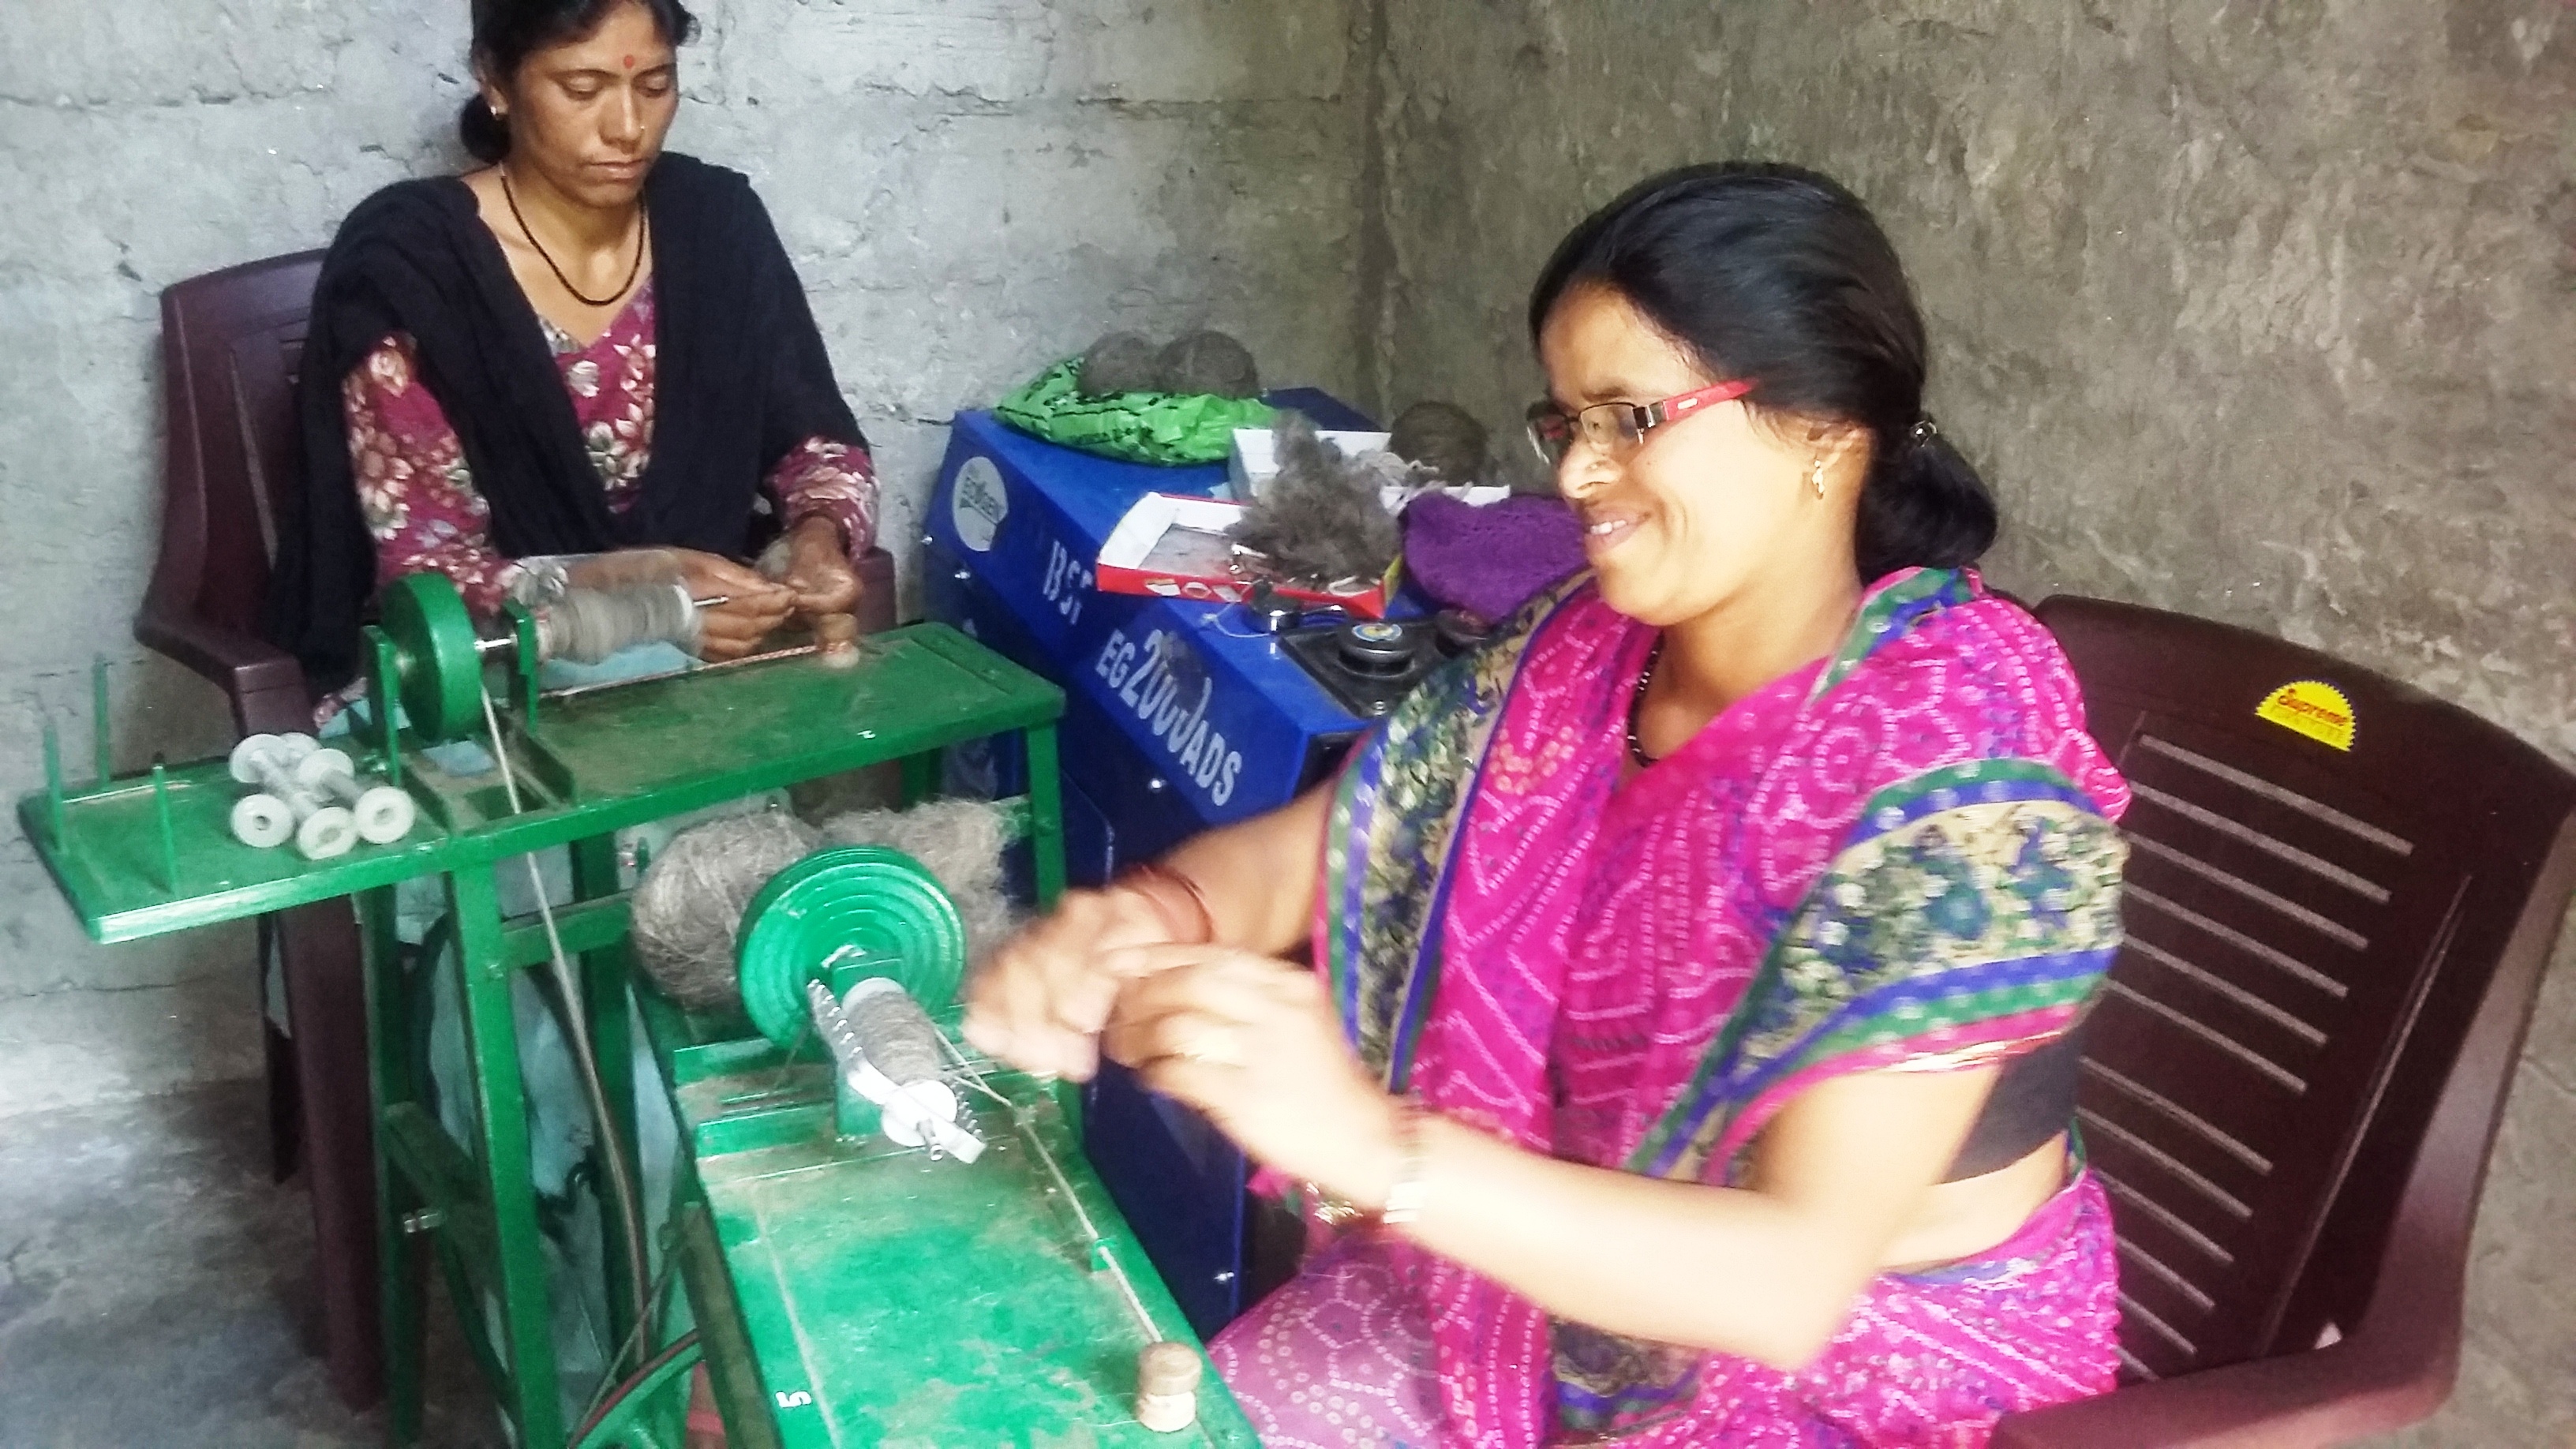  Widowed young, Vijaya Devi, 36, who lost her son, the sole earning member of the family in the flash floods, today is working work part-time at the centre started by Himmotthan where women earn spinning thread from wool. (Credit: Nitin Jugran Bahuguna\WFS)